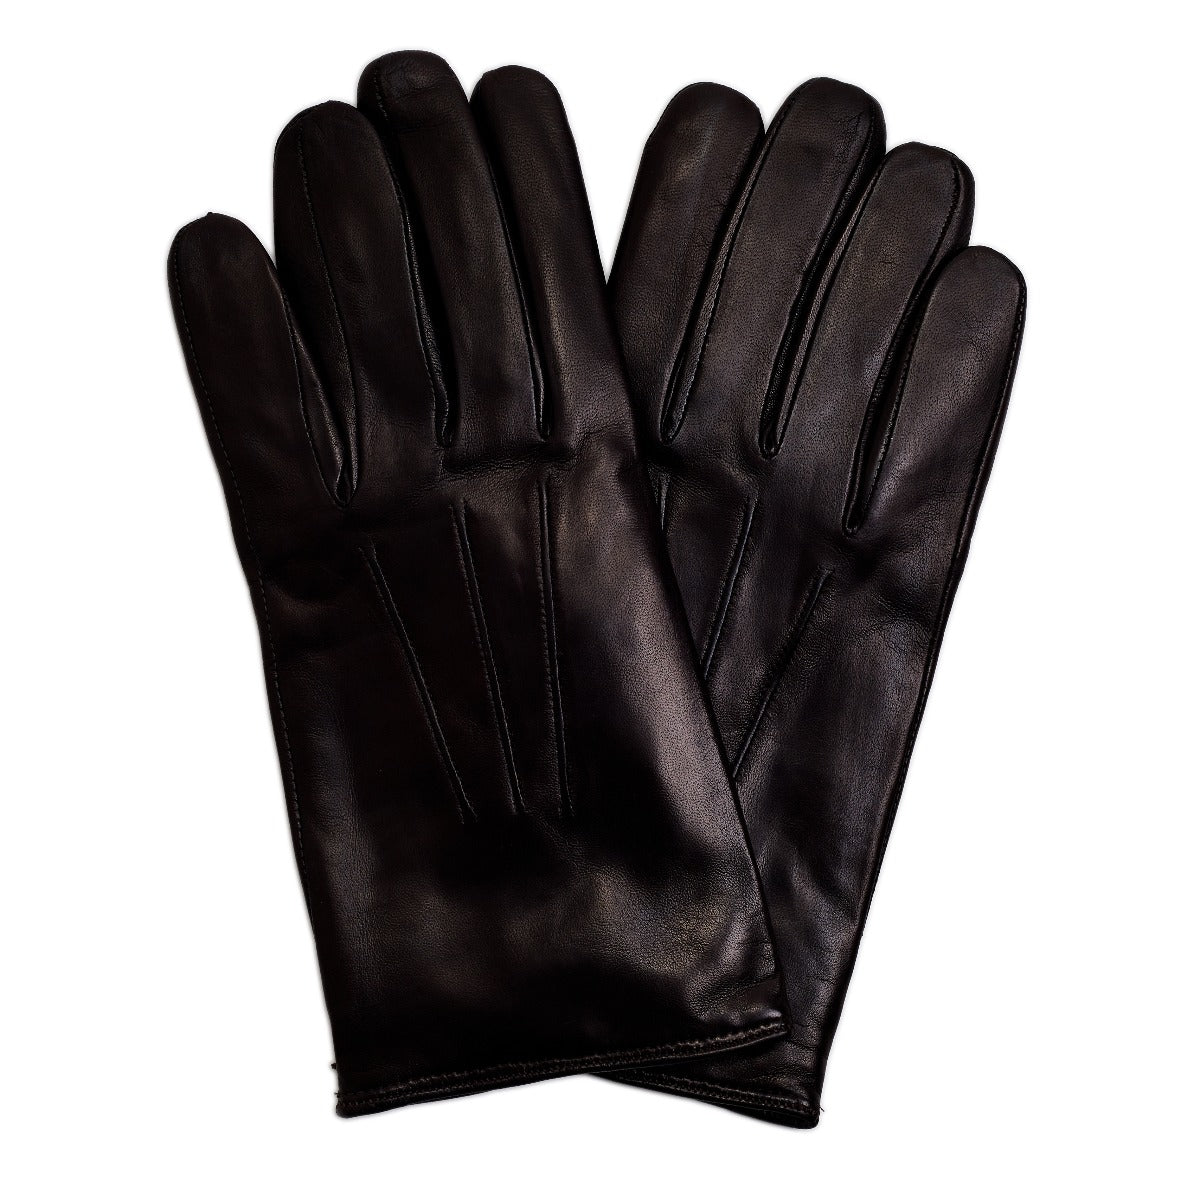 Sovereign Grade Dark Brown Nappa Leather Gloves, Cashmere Lined